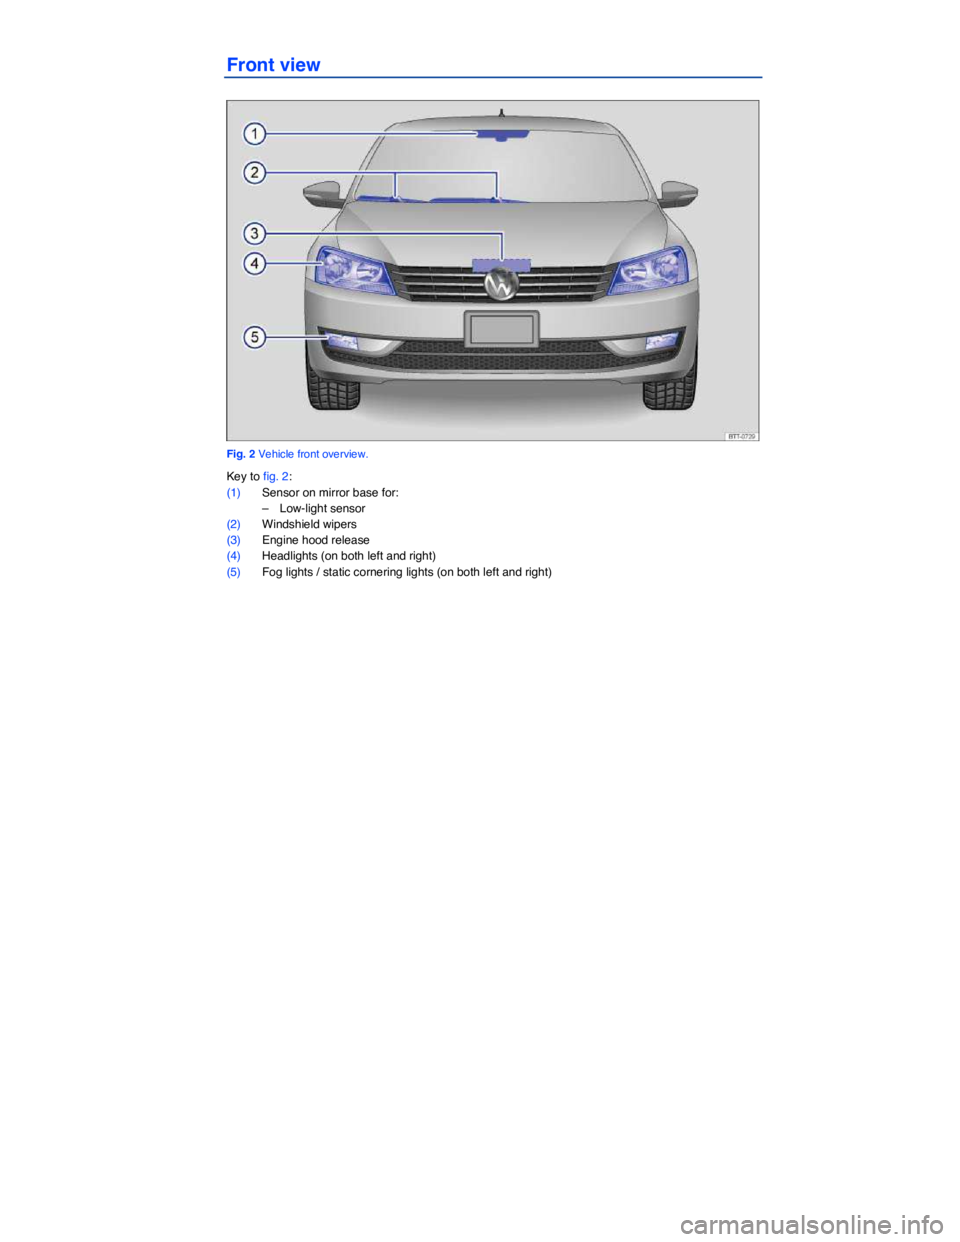 VOLKSWAGEN PASSAT SEL PREMIUM 2014  Owners Manual  
Front view 
 
Fig. 2 Vehicle front overview. 
Key to fig. 2: 
(1) Sensor on mirror base for: 
–  Low-light sensor  
(2) Windshield wipers  
(3) Engine hood release  
(4) Headlights (on both left a